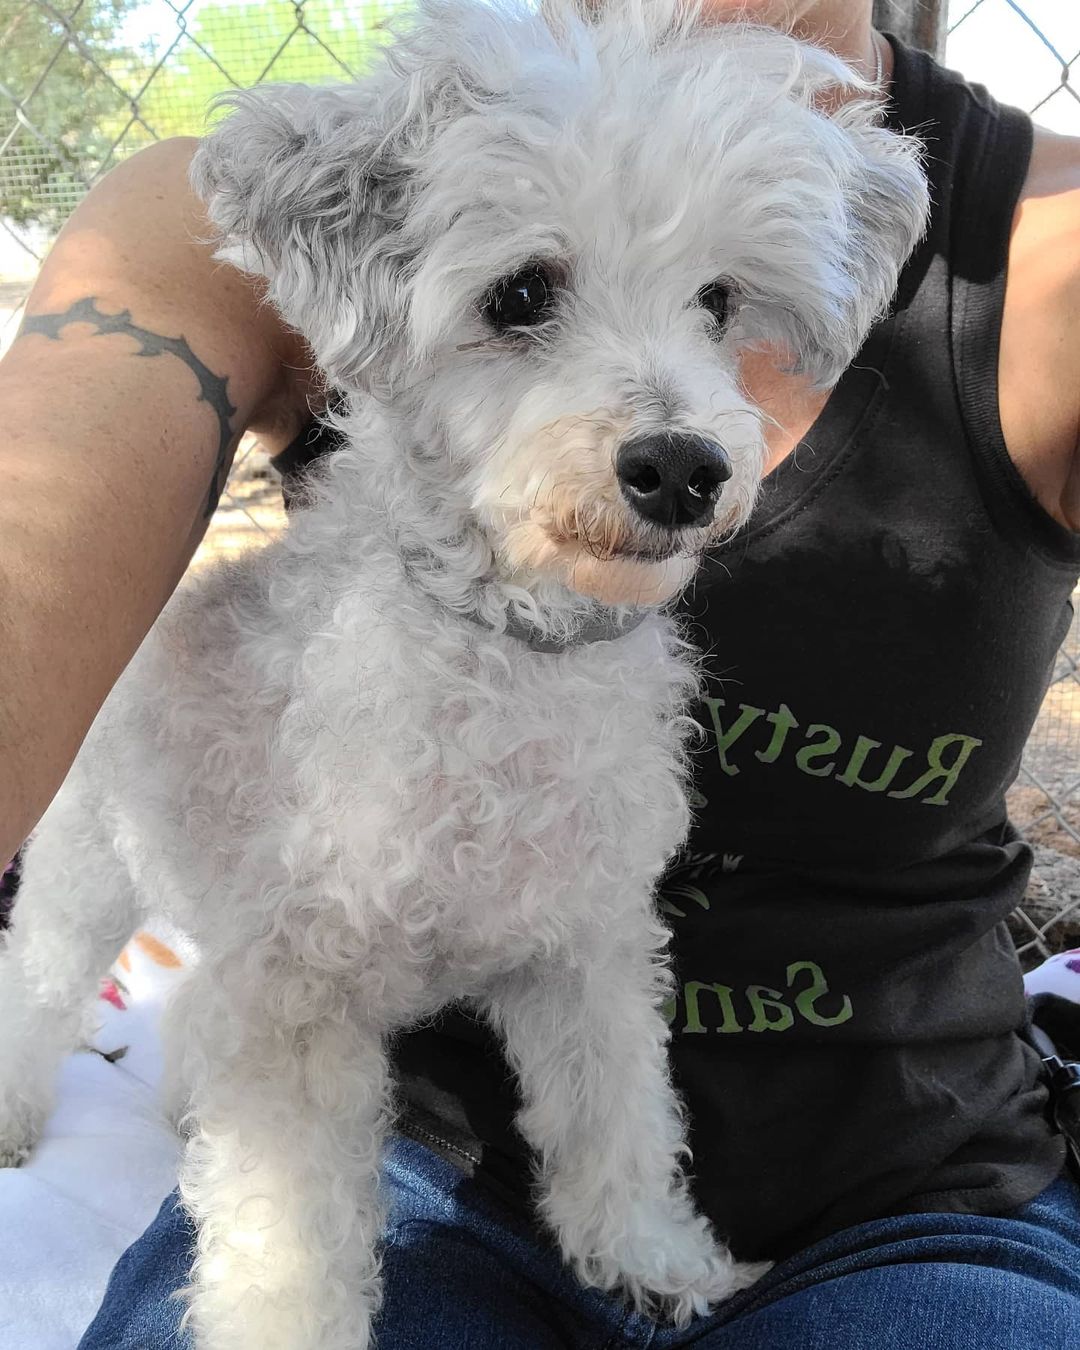 Today was a big day!!! Why you ask?!?! Because we rescued Rusty's Angel # 300!!!!! And let me tell you he's a cutie patootie!!!

This is 11-13 year old Manny. His story is sad and heartbreaking as his life, until now, was used for greed. He was owned by a breeder in Mesa. A year ago she sold him to a woman who thought she was buying a young poodle. The breeder lied and sold her a senior, debarked, unneutered dog with only 3 teeth.
Sadly with no experience owning dogs and especially no experience owning senior dogs she found herself in over her head. But thankfully she found us. 

Manny is amazing and once he is neutered he will be the perfect dog, literally! I mean just look at him!!!! 

We are confident we will have no trouble finding his perfect match that will give him the life he should have had all along. 
If your interested, get your adoption application in early because we know this handsome boy won't be here long. 

Welcome home Manny. This is where you start living your best life.

❤🐾❤

Adoption application:
https://docs.google.com/forms/d/e/1FAIpQLSel9SLUQQKsDiDZys98l63VIWHF66WkleWSelF5s1FXNyd1AQ/viewform